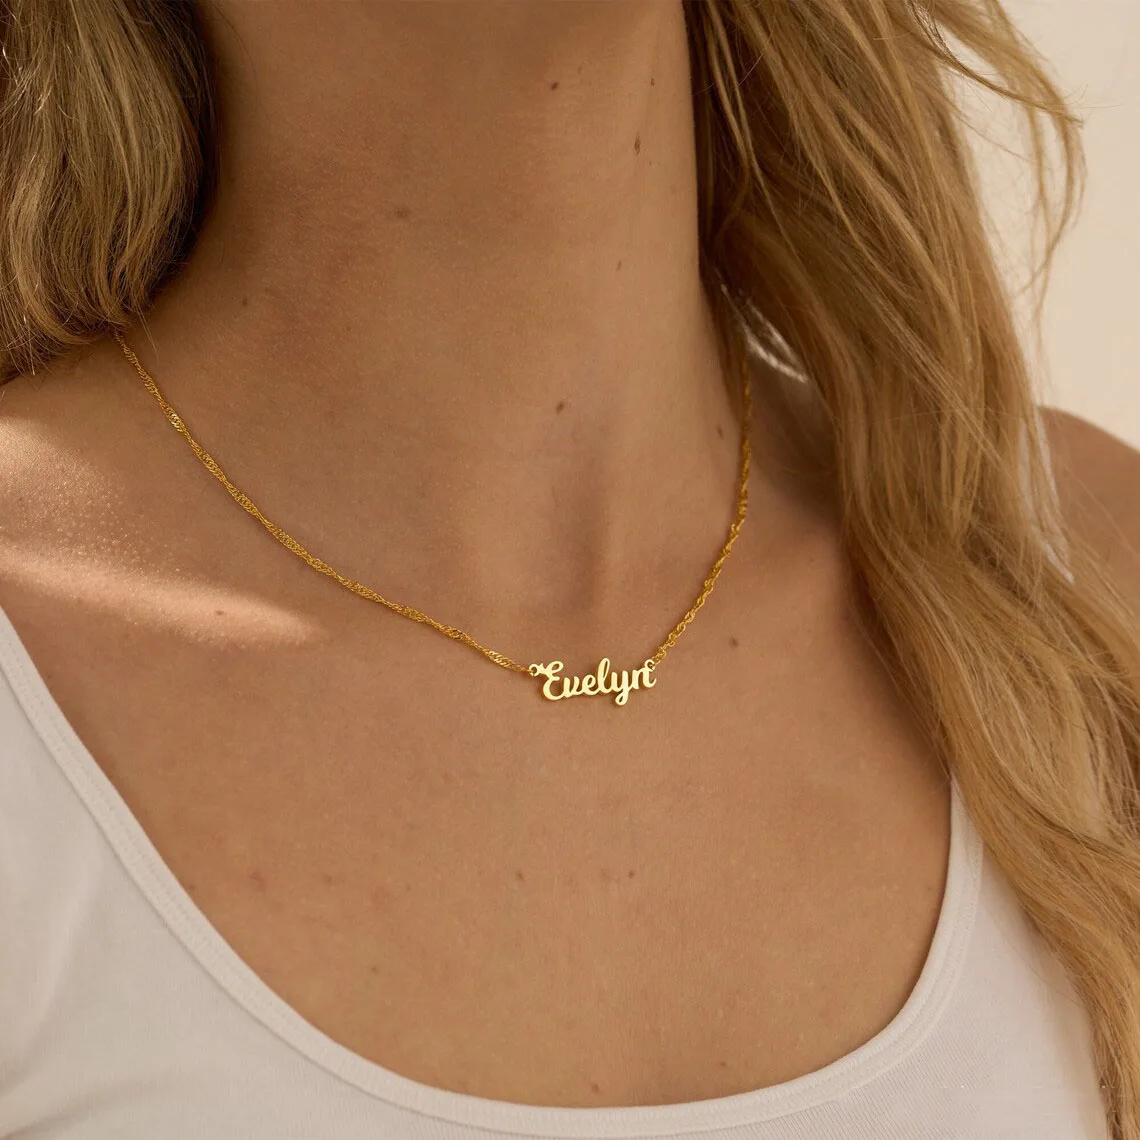 Custom Twist Chain Name Necklace Gold Name Necklace for Women Personalized Jewelry  Birthday Gift for Her Mothers Day Gift